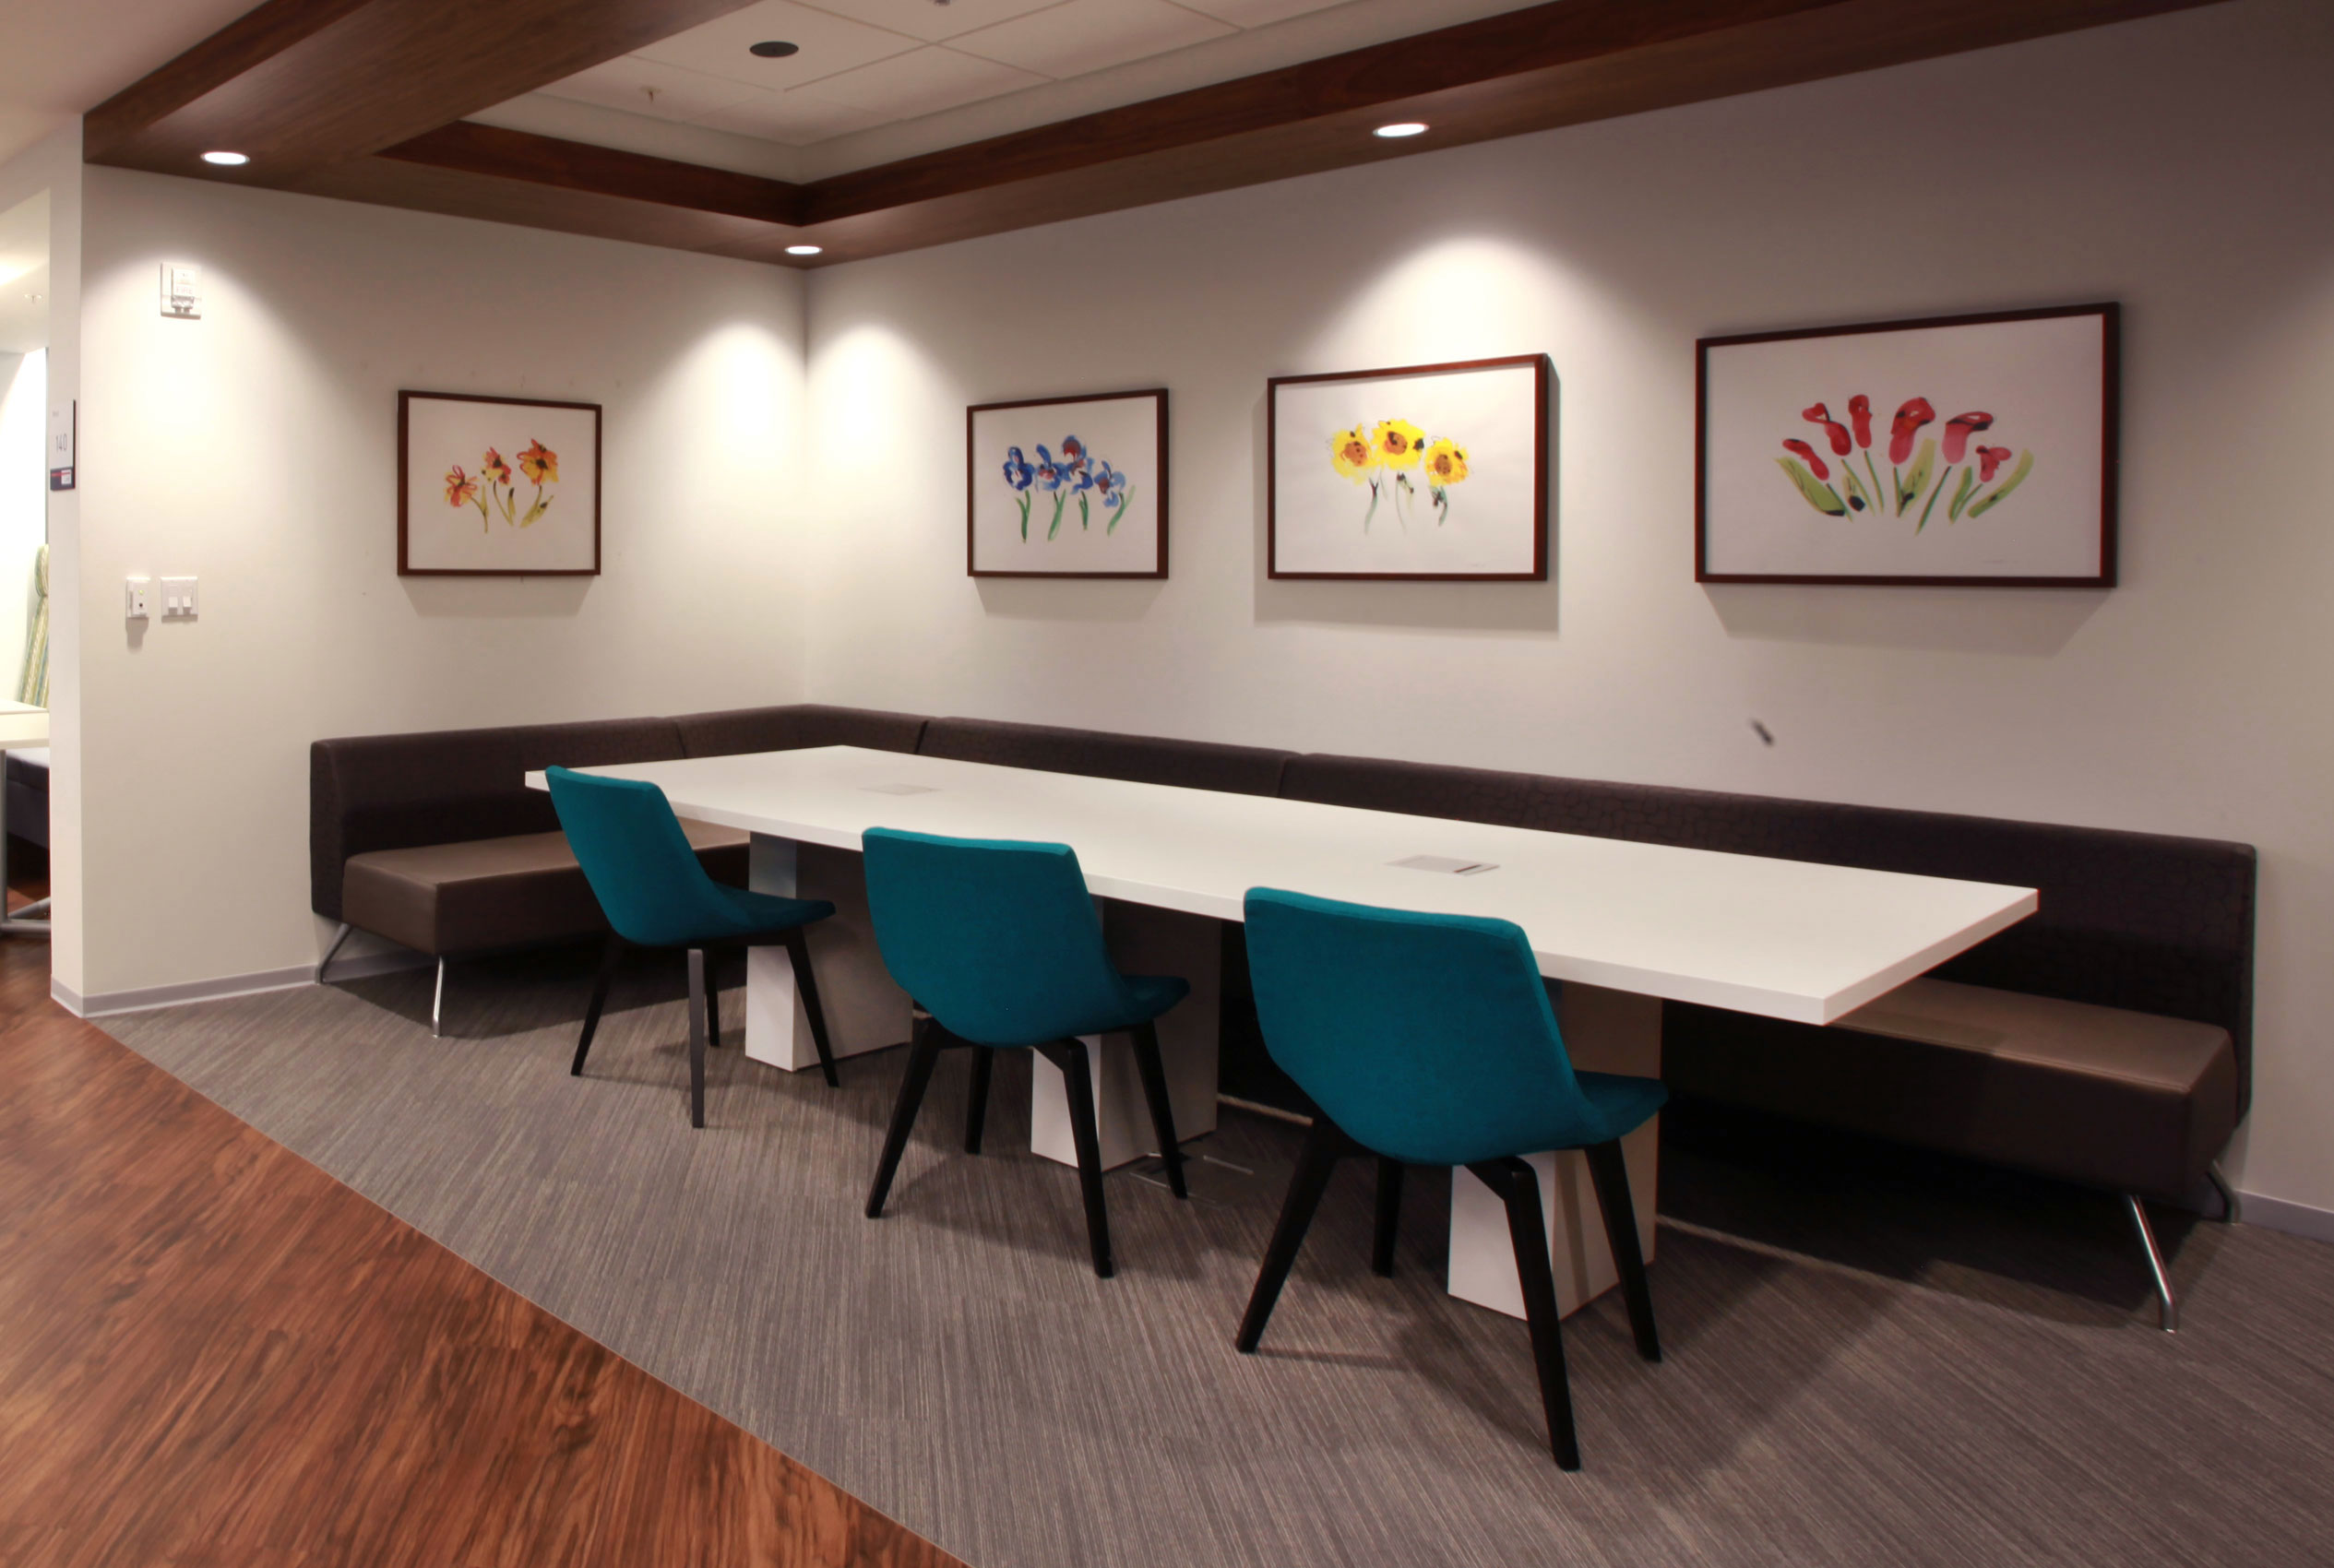 Conference table in cafeteria with four paintings of flowers